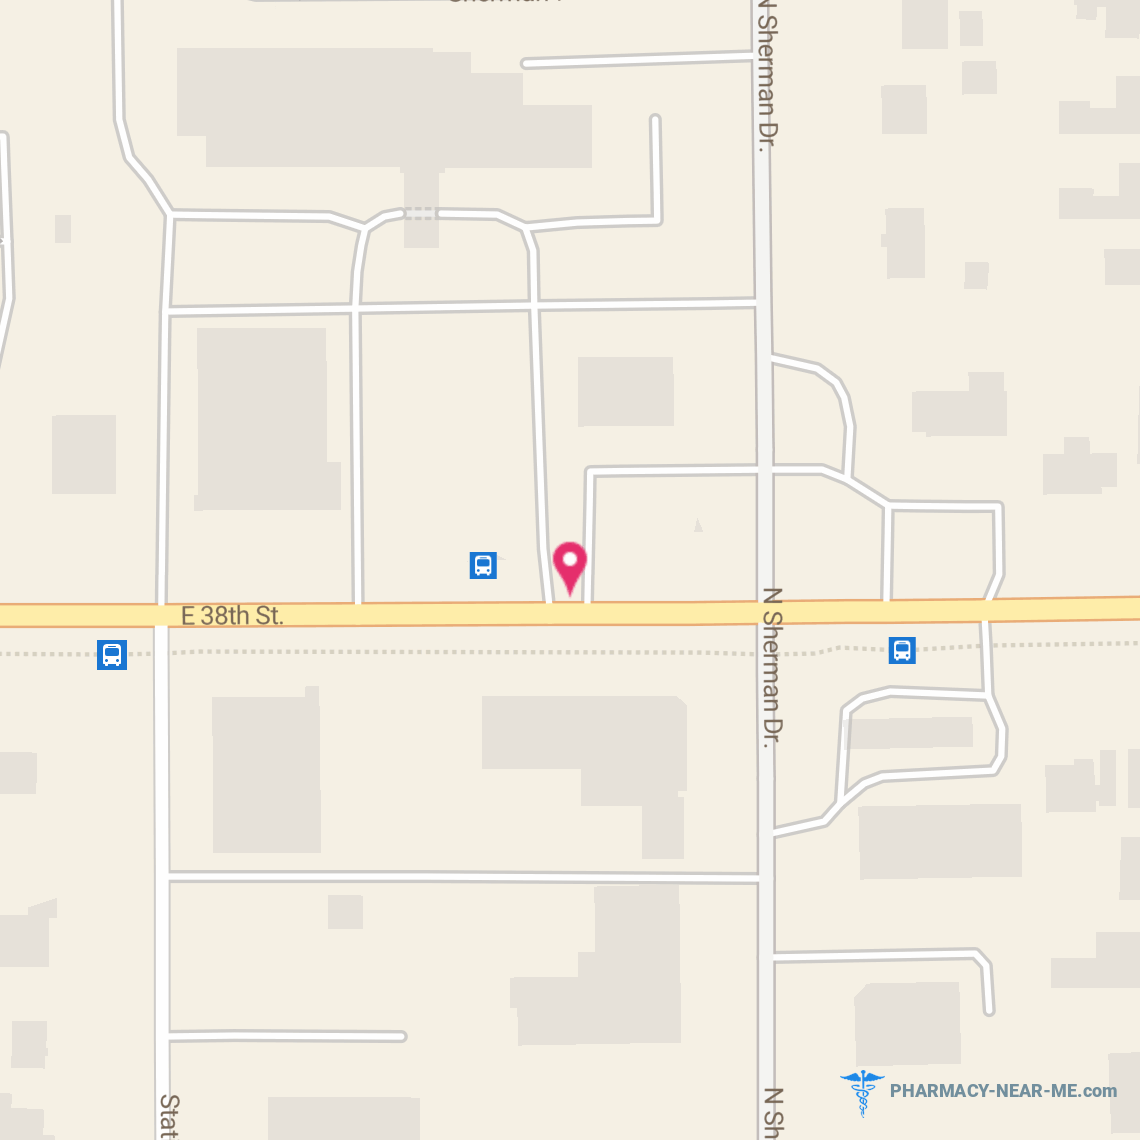 WALGREENS #21381 - Pharmacy Hours, Phone, Reviews & Information: 2920 E 38th St, Indianapolis, Indiana 46218, United States